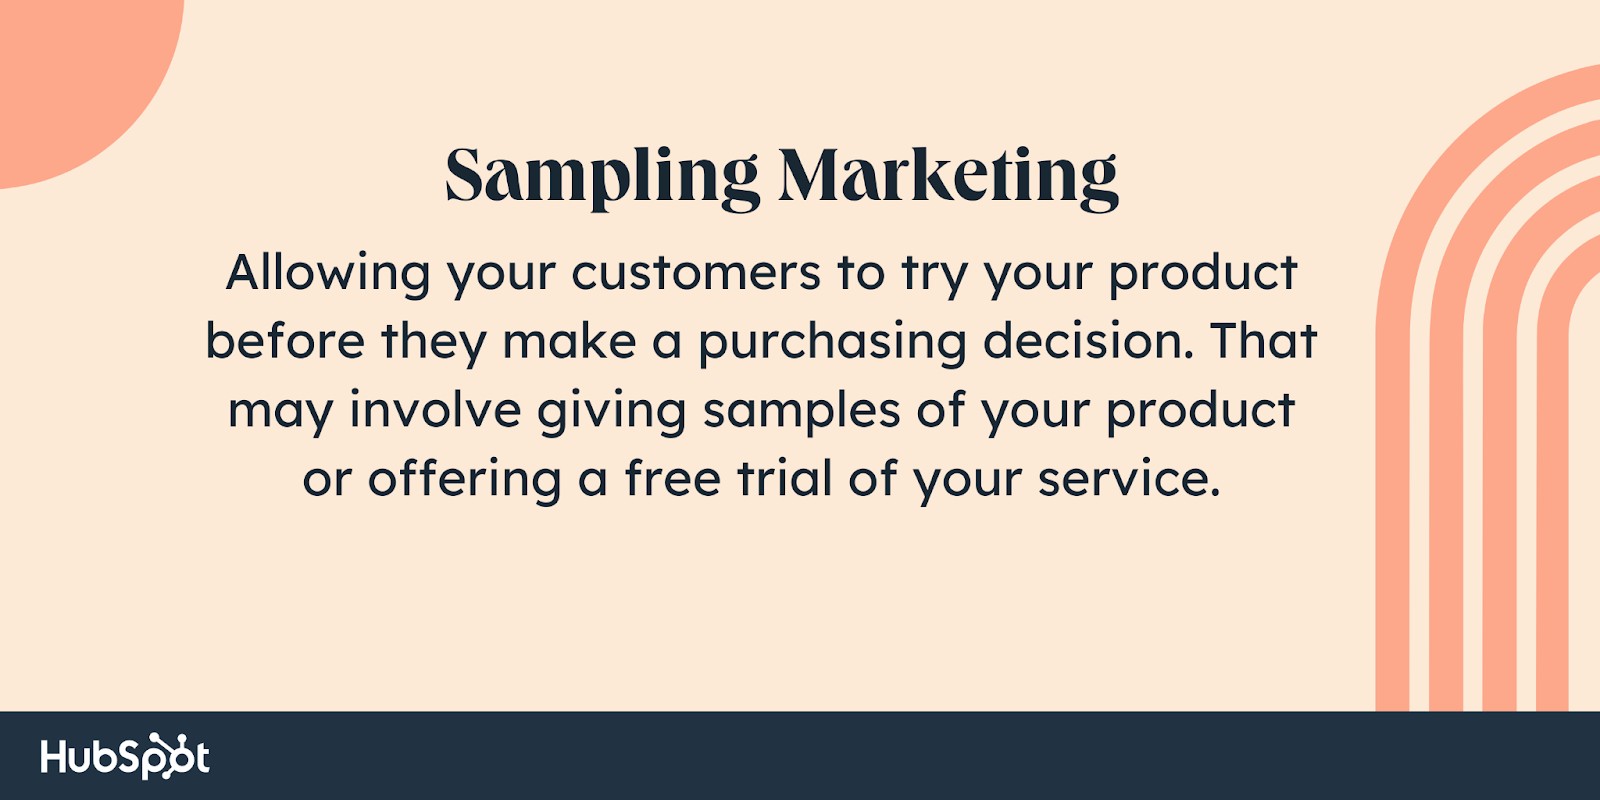 Sampling marketing. Allowing your customers to try your product before they make a purchasing decision. That may involve giving samples of your product or offering a free trial of your service.